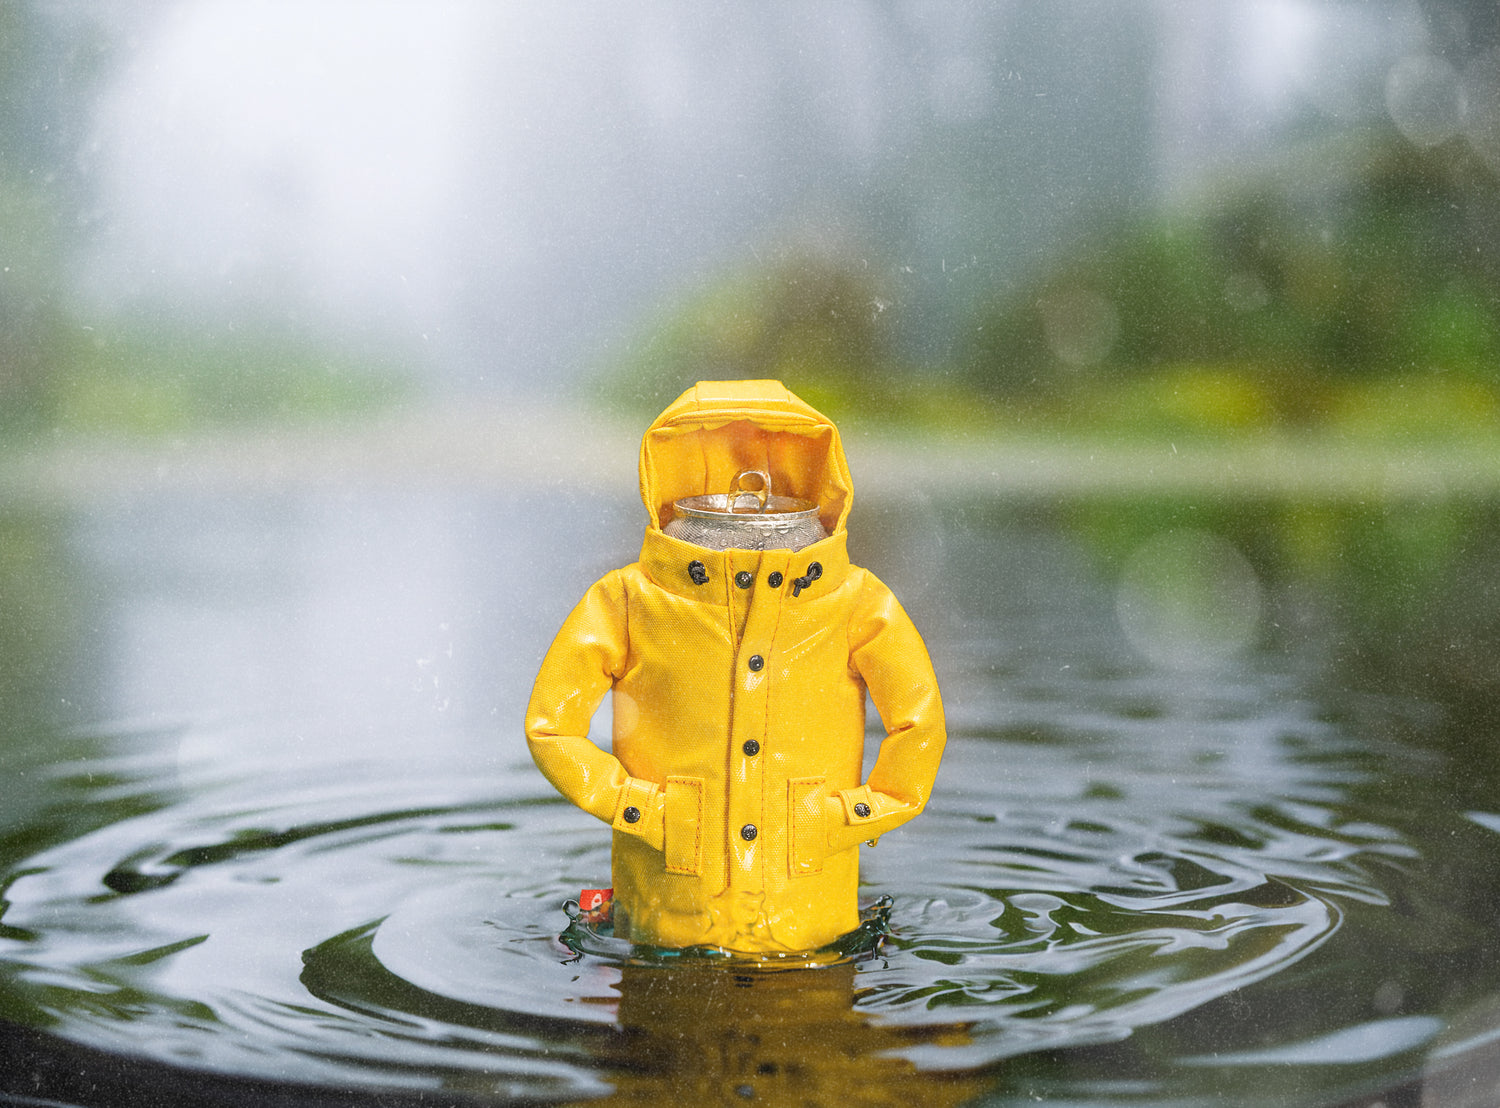 The Raincoat by Puffin Drinkwear